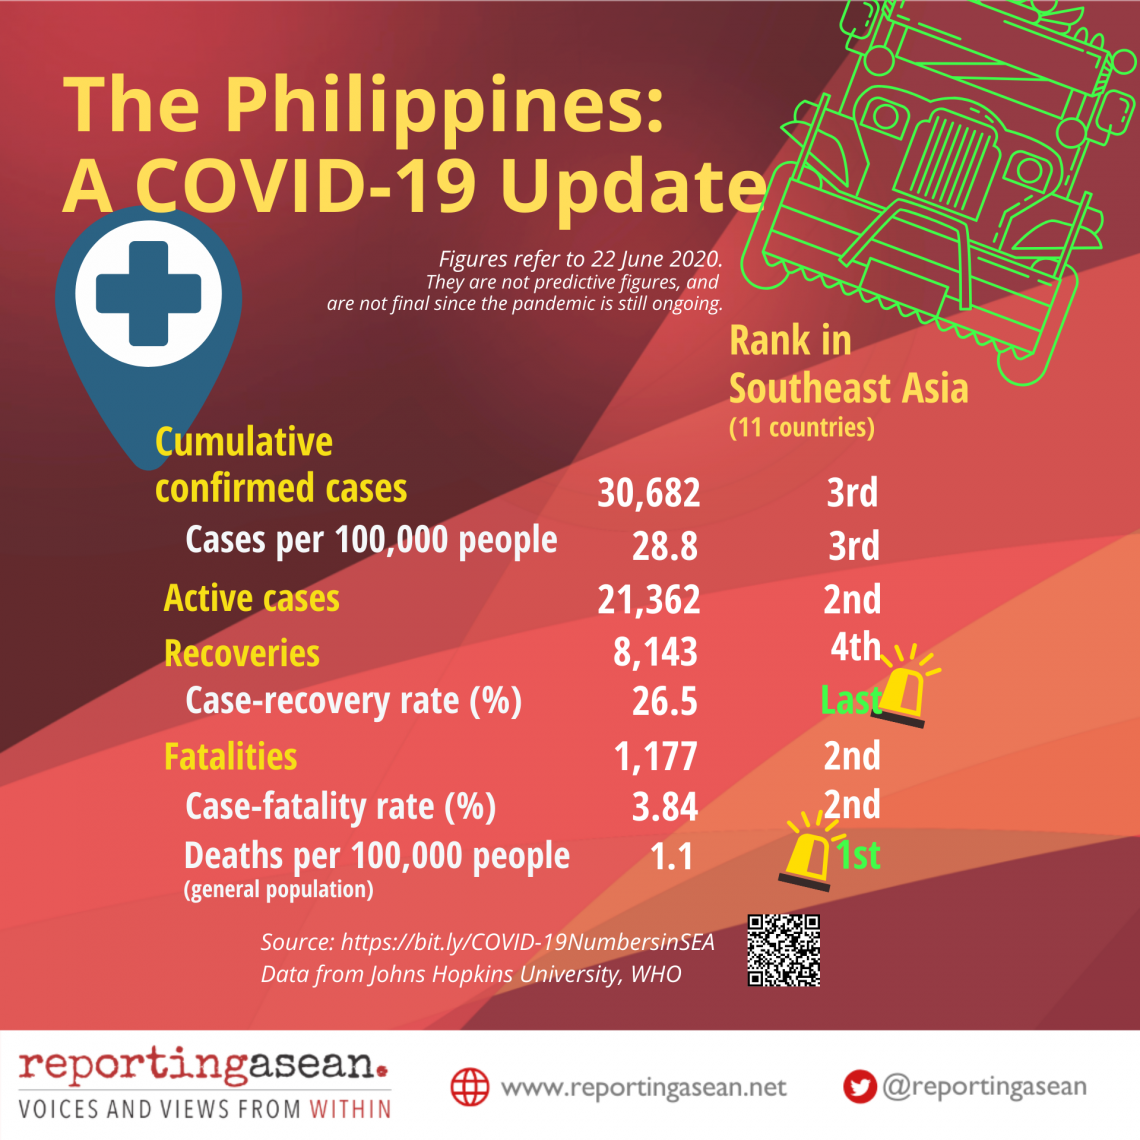 Infographic on the Philippine COVID-19 profile (as of 25 June, updated)